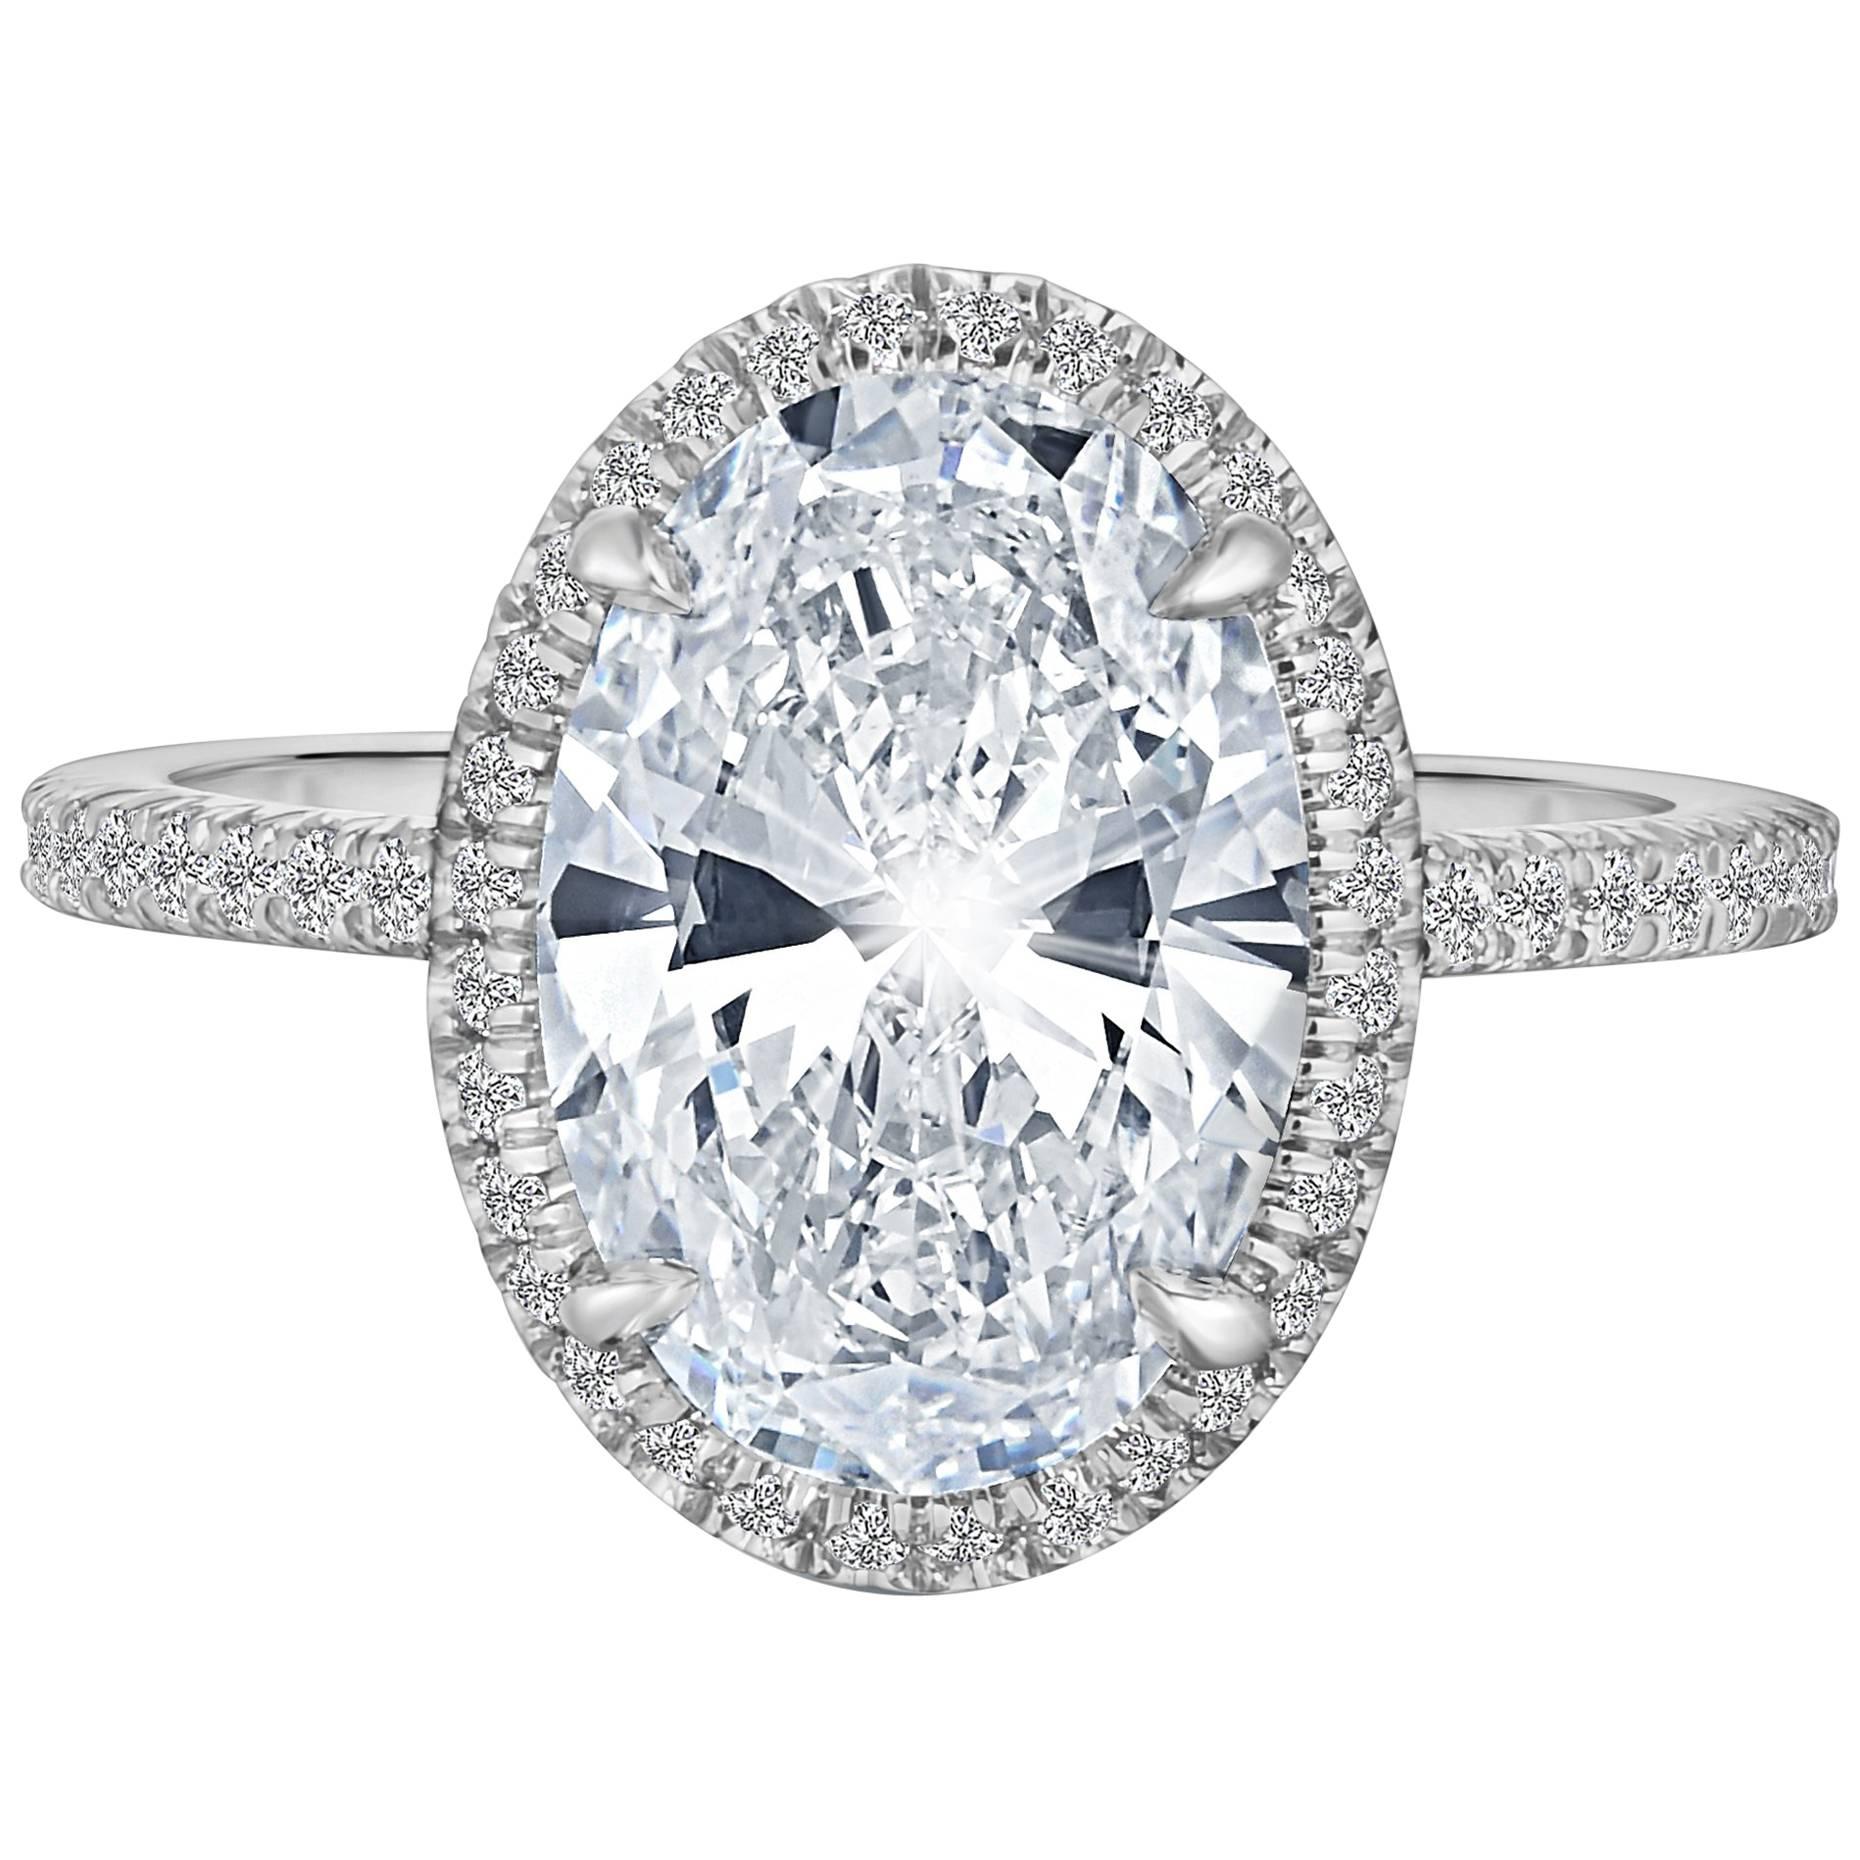 Marisa Perry 2.34 Oval Brilliant Engagement Ring with Micro-Pave in Platinum 